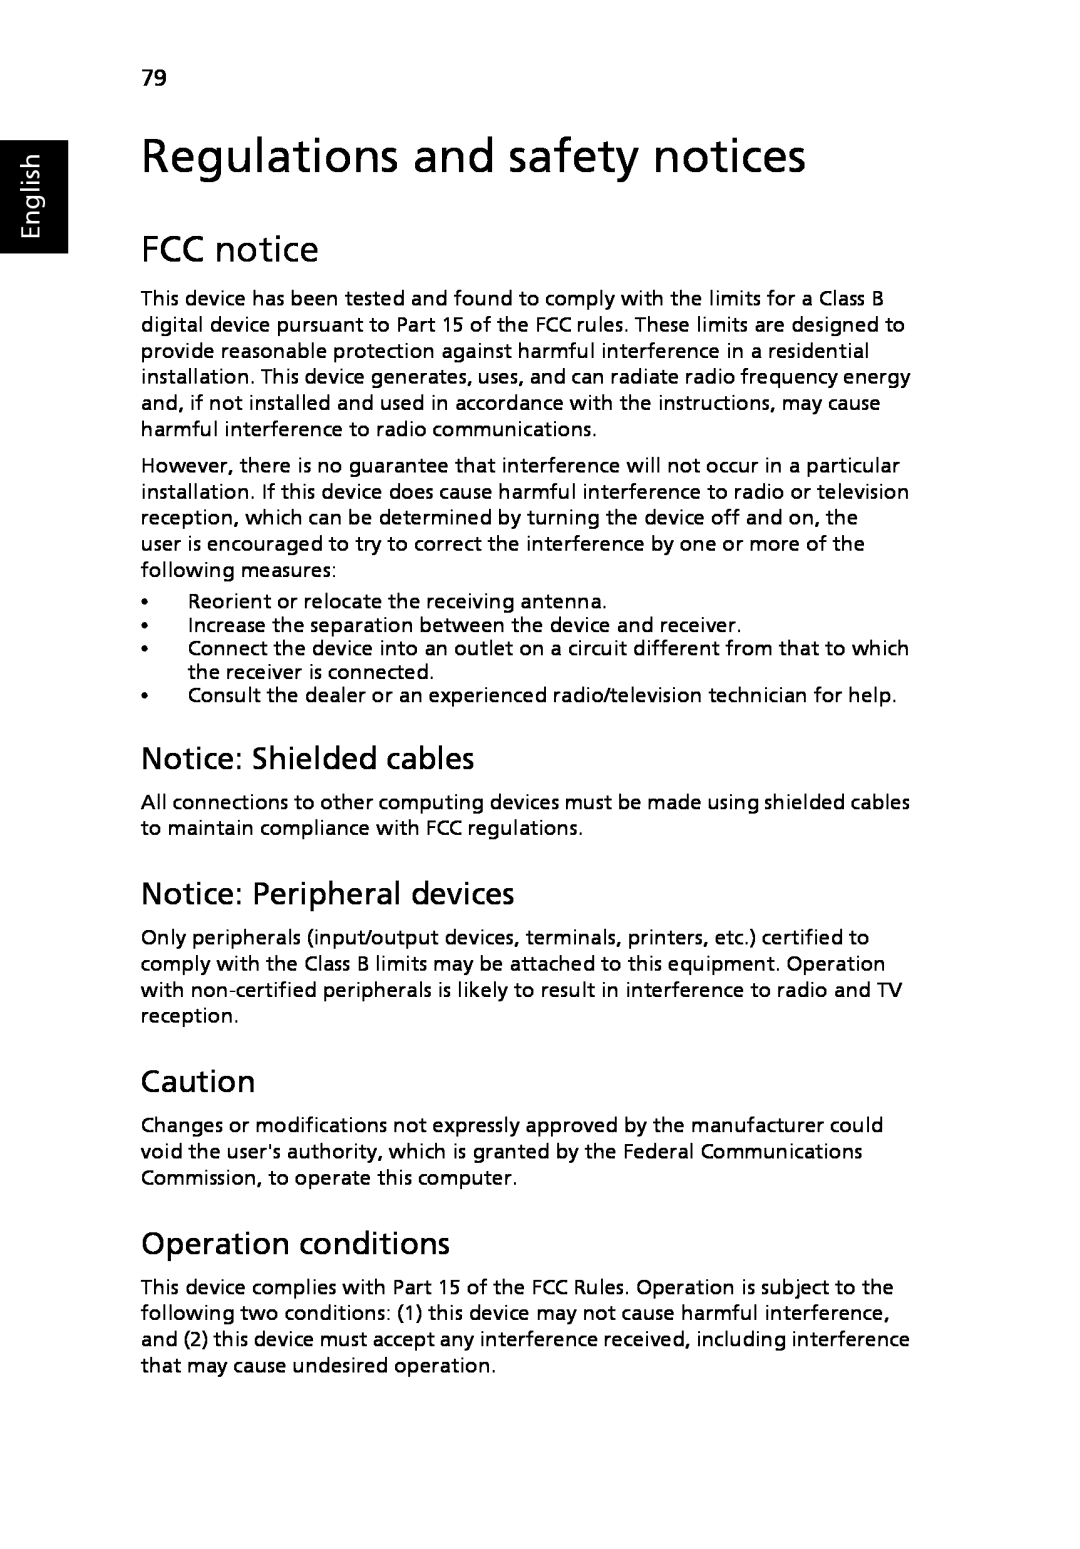 Acer 8920 Series Regulations and safety notices, FCC notice, Notice Shielded cables, Notice Peripheral devices, English 